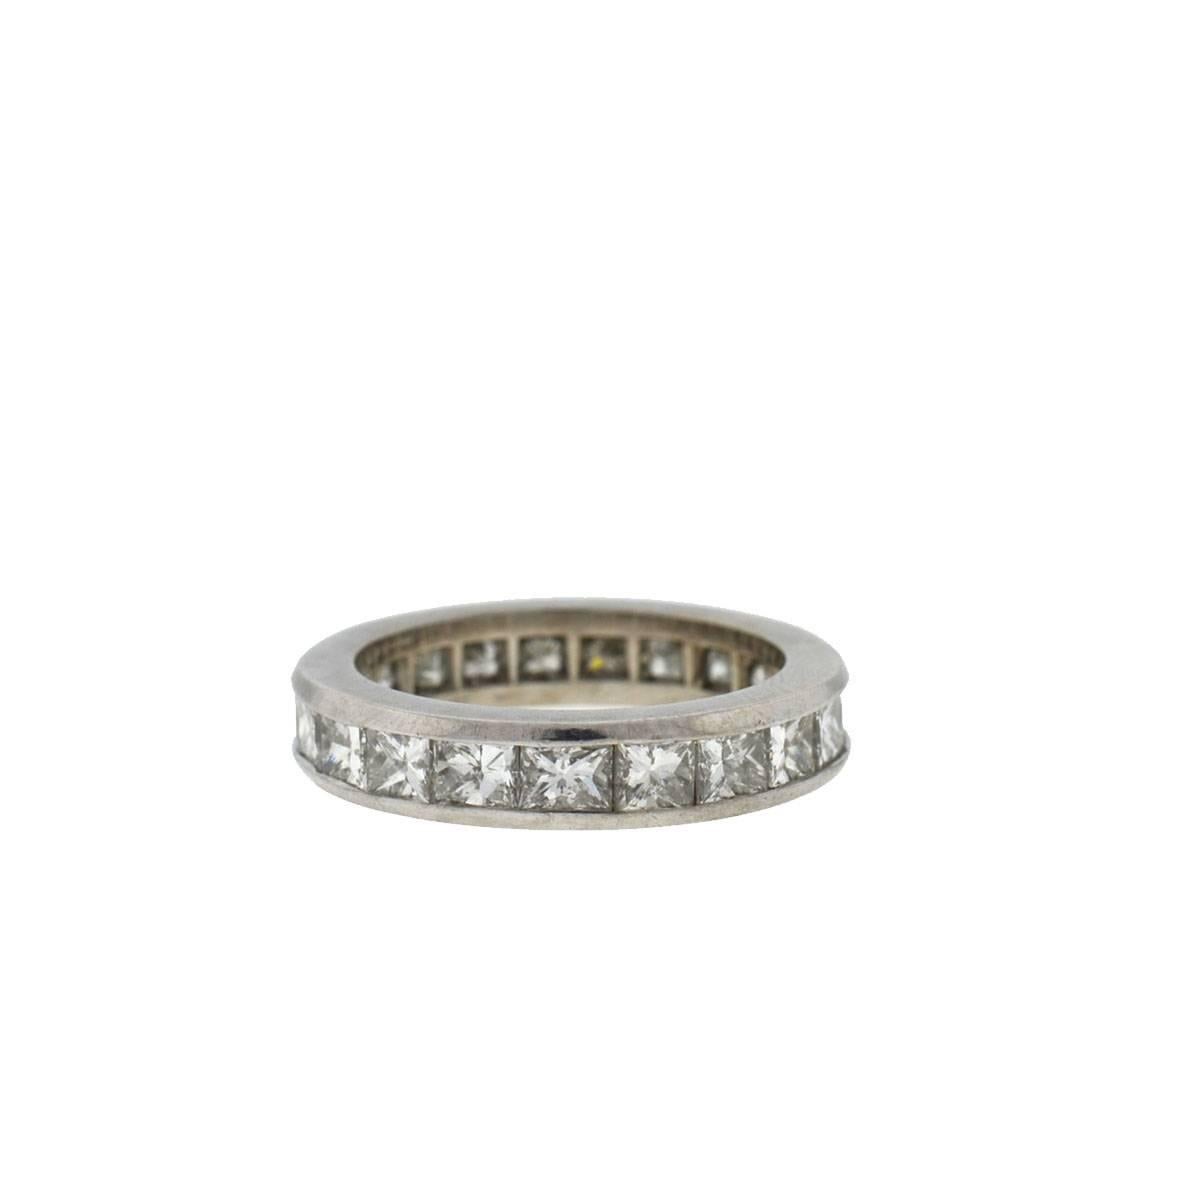 Company-N/A
Style-Princess Cut Eternity Band
Metal-18k White Gold
Size-6
Weight-7.5 grams	
Stones	Diamonds approx. 6.38cts
                  22 Stones
Sku:8928-2TEEE